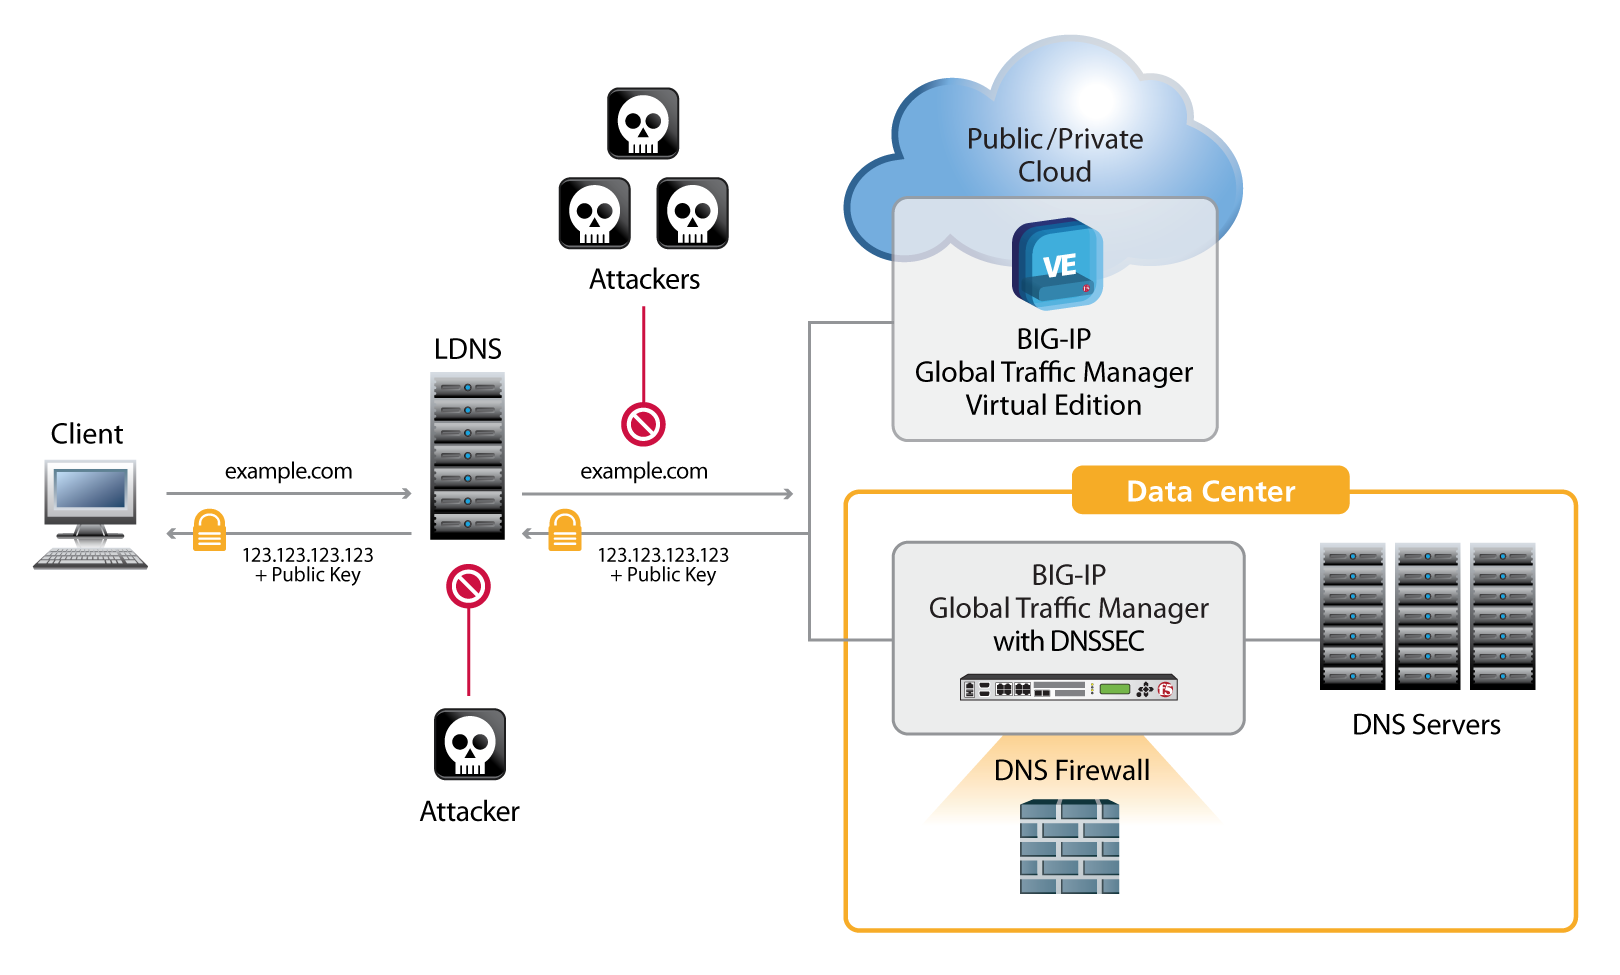 BIG-IP GTM with DNSSEC delivers real-time signed DNS query responses to clients.